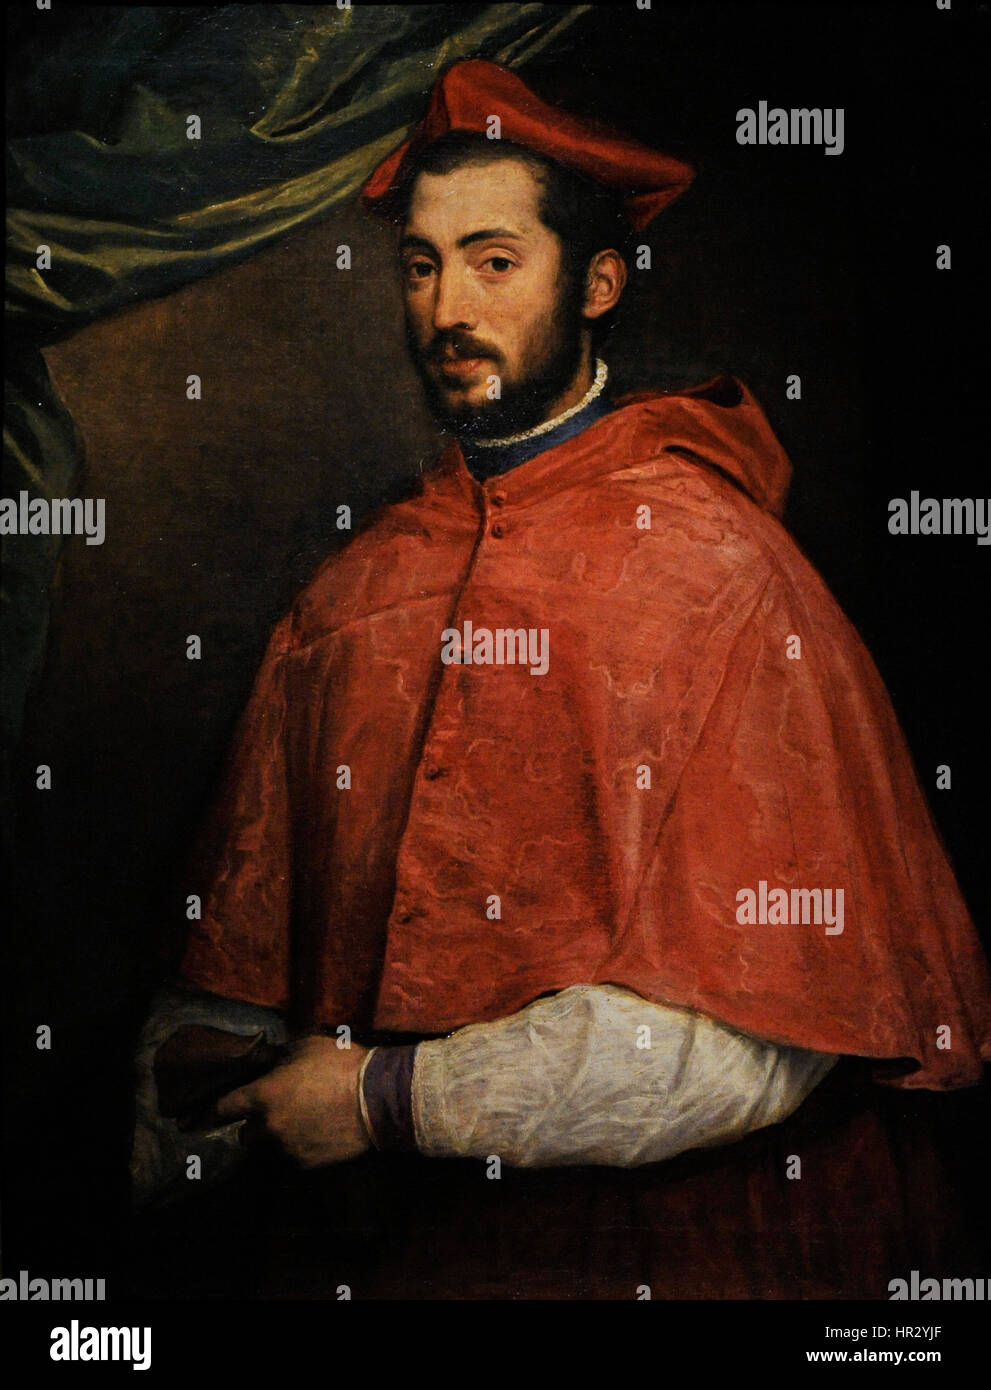 Titian (1489/1490-1576). Italian painter. Portrait of Cardinal Alessandro Farnese, 1545-1546. Farnese Collection. National Museum of Capodimonte. Naples. Italy. Stock Photo